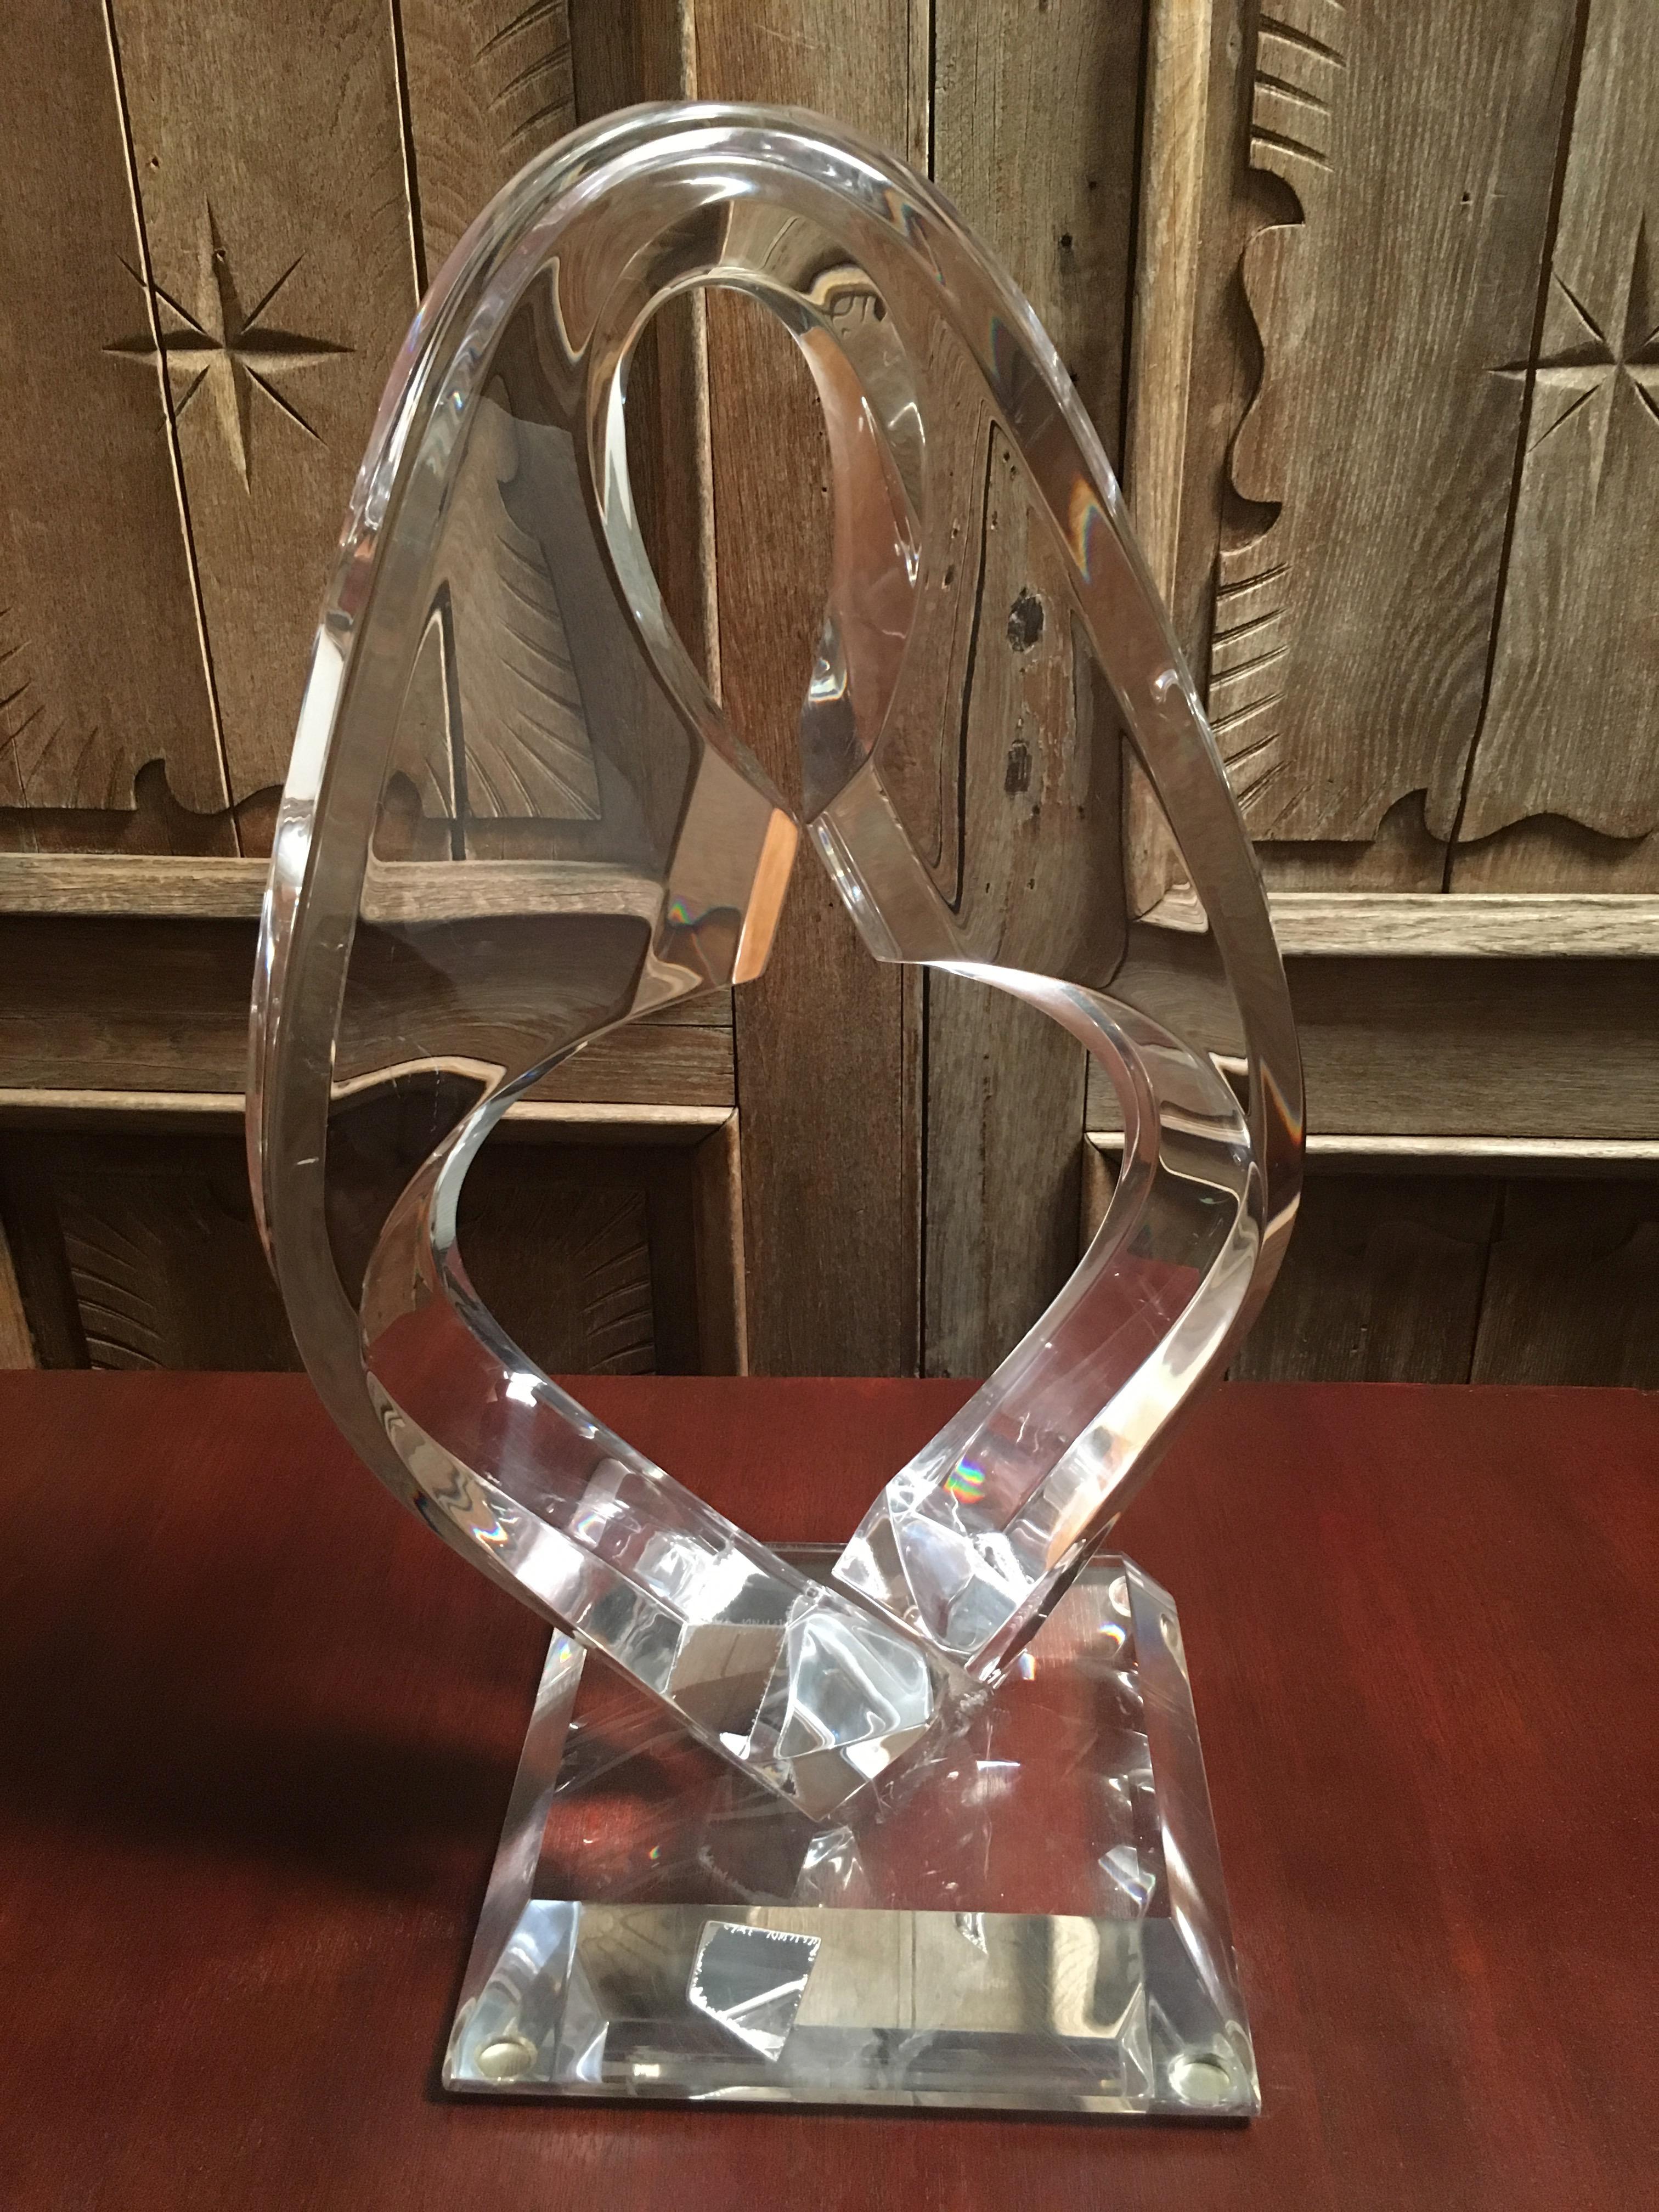 North American Twisted Lucite Sculpture by Shlomi Haziza For Sale